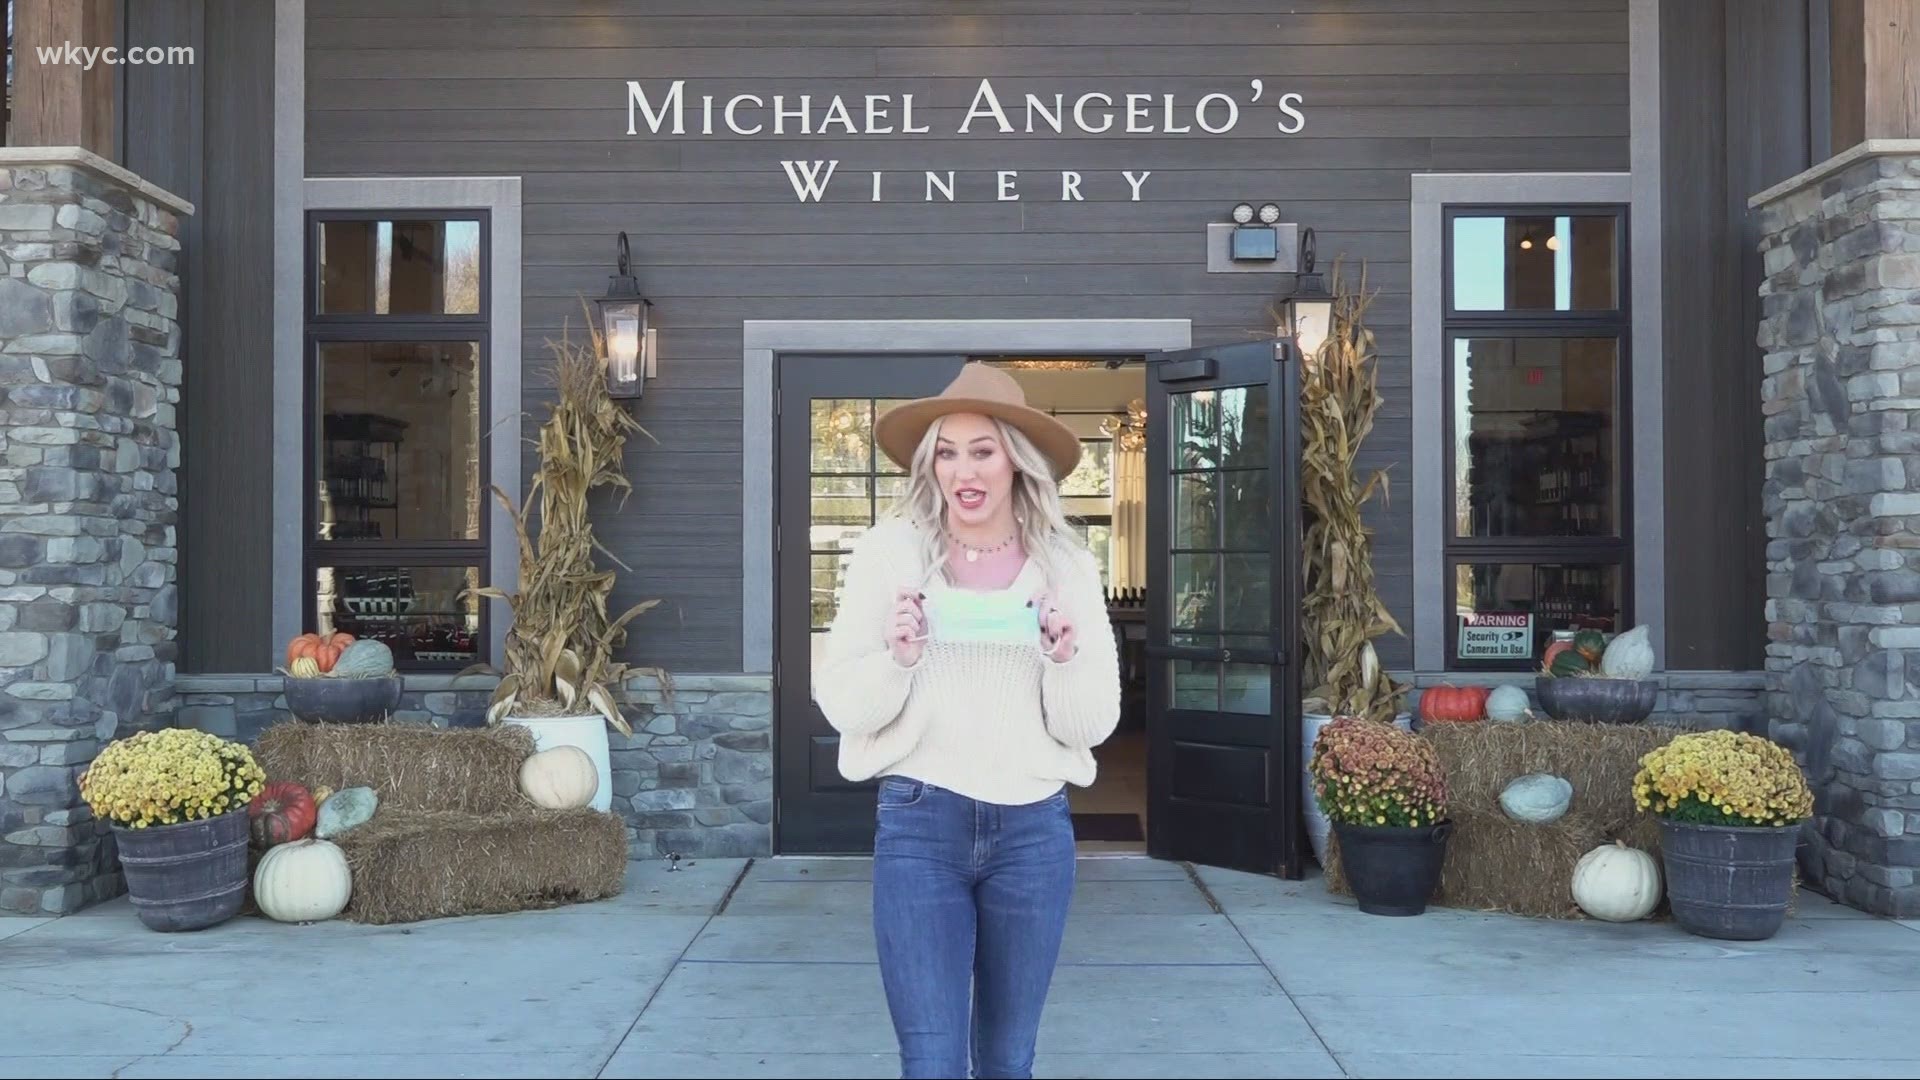 The weather has been perfect across Northeast Ohio. 3News Correspondent Emily Mayfield takes us on a tours of some of the best wineries in the areas.